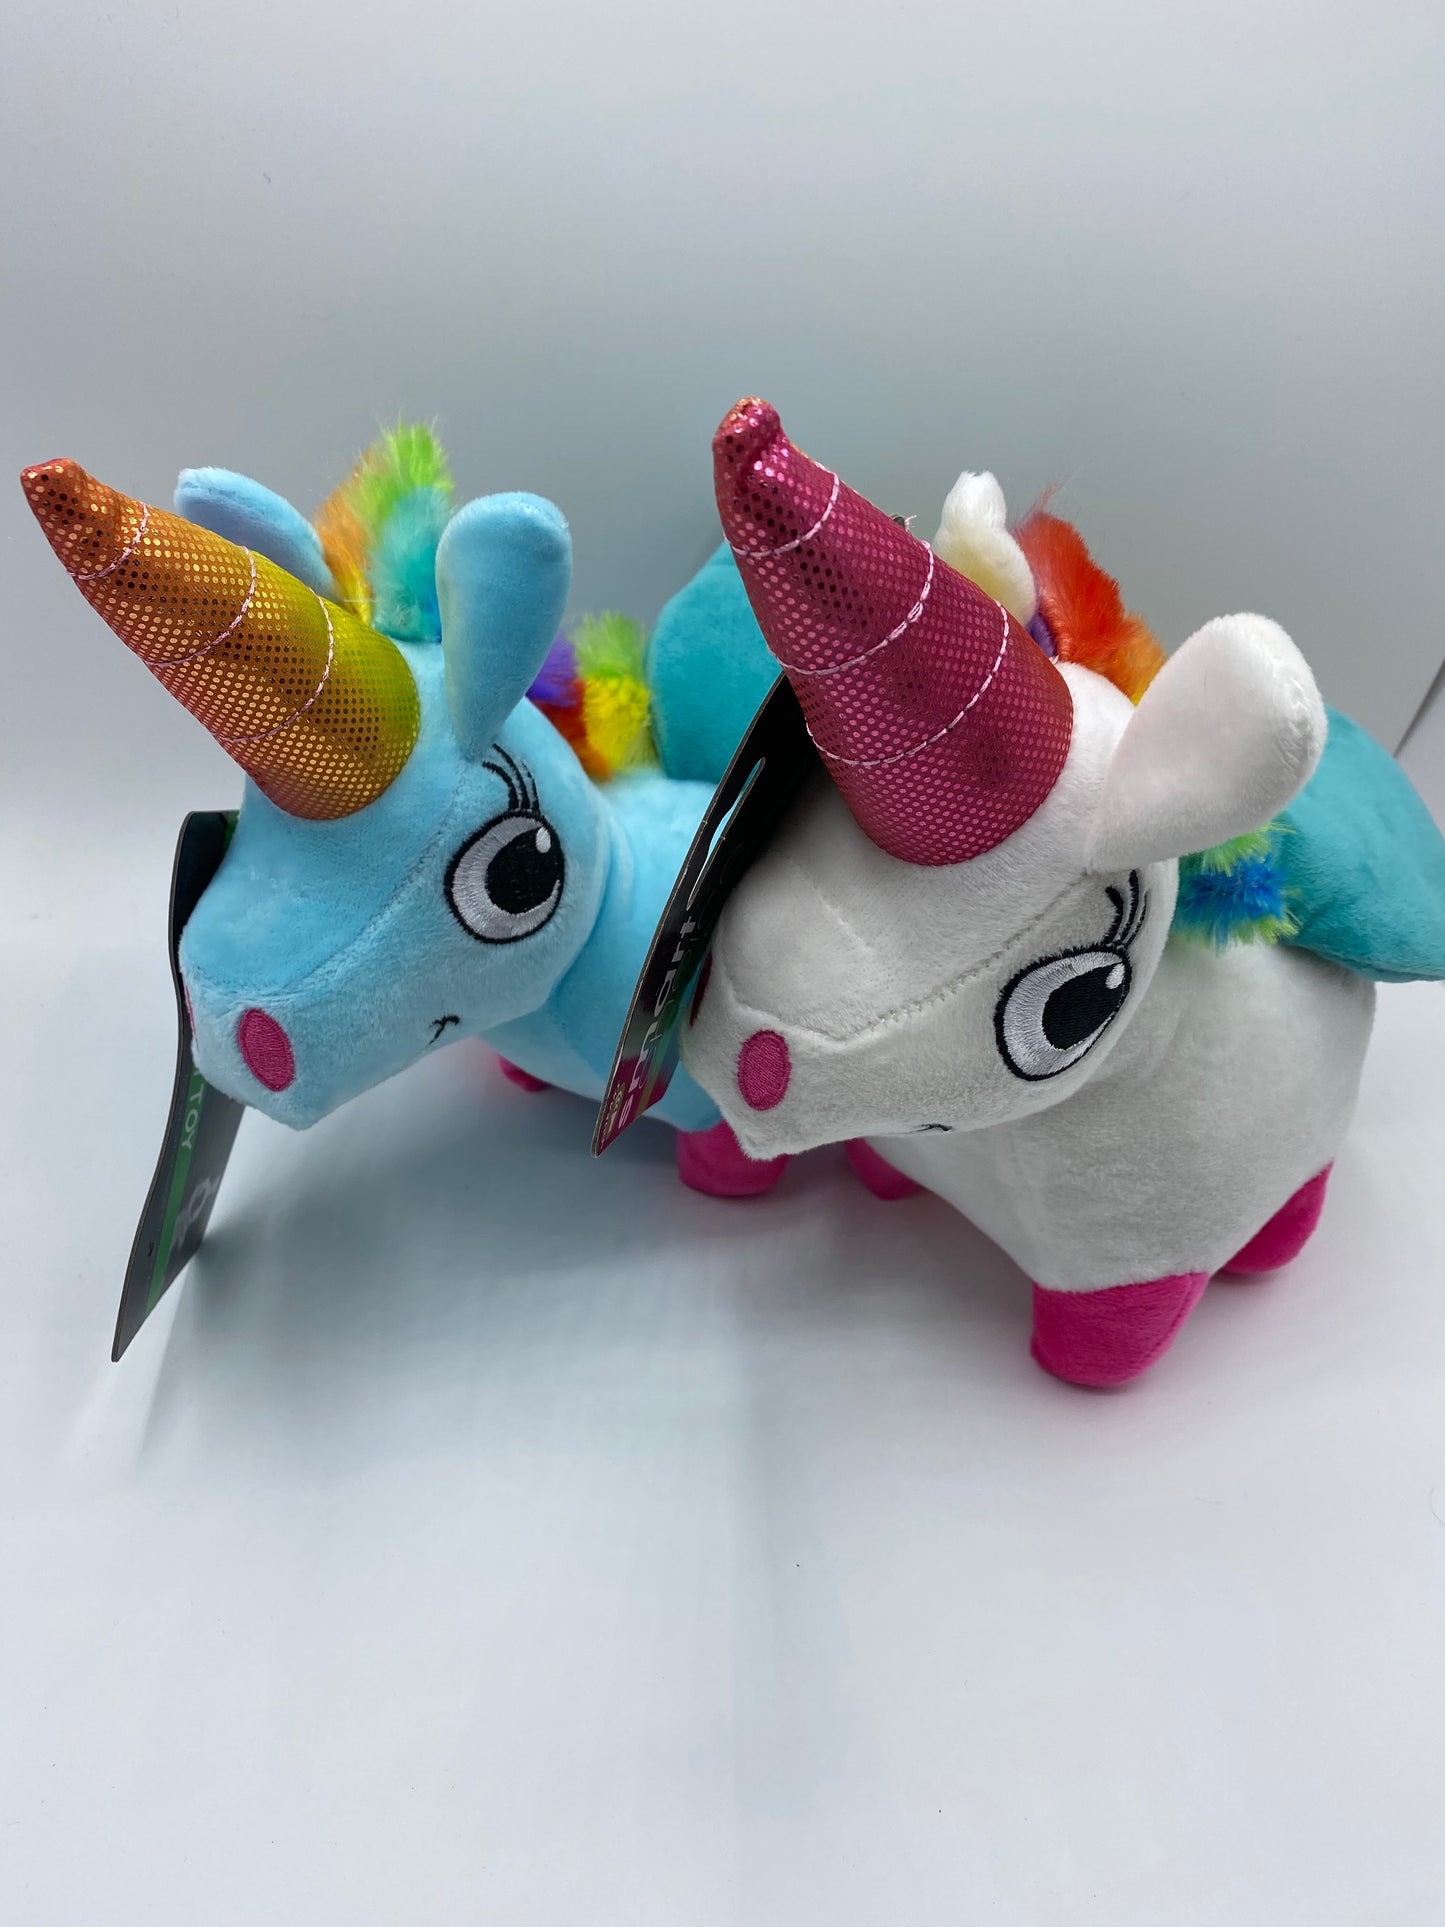 Plush Unicorn with Squeaker Dog Toy in Two Colours White and Blue Size Approx 25cm High